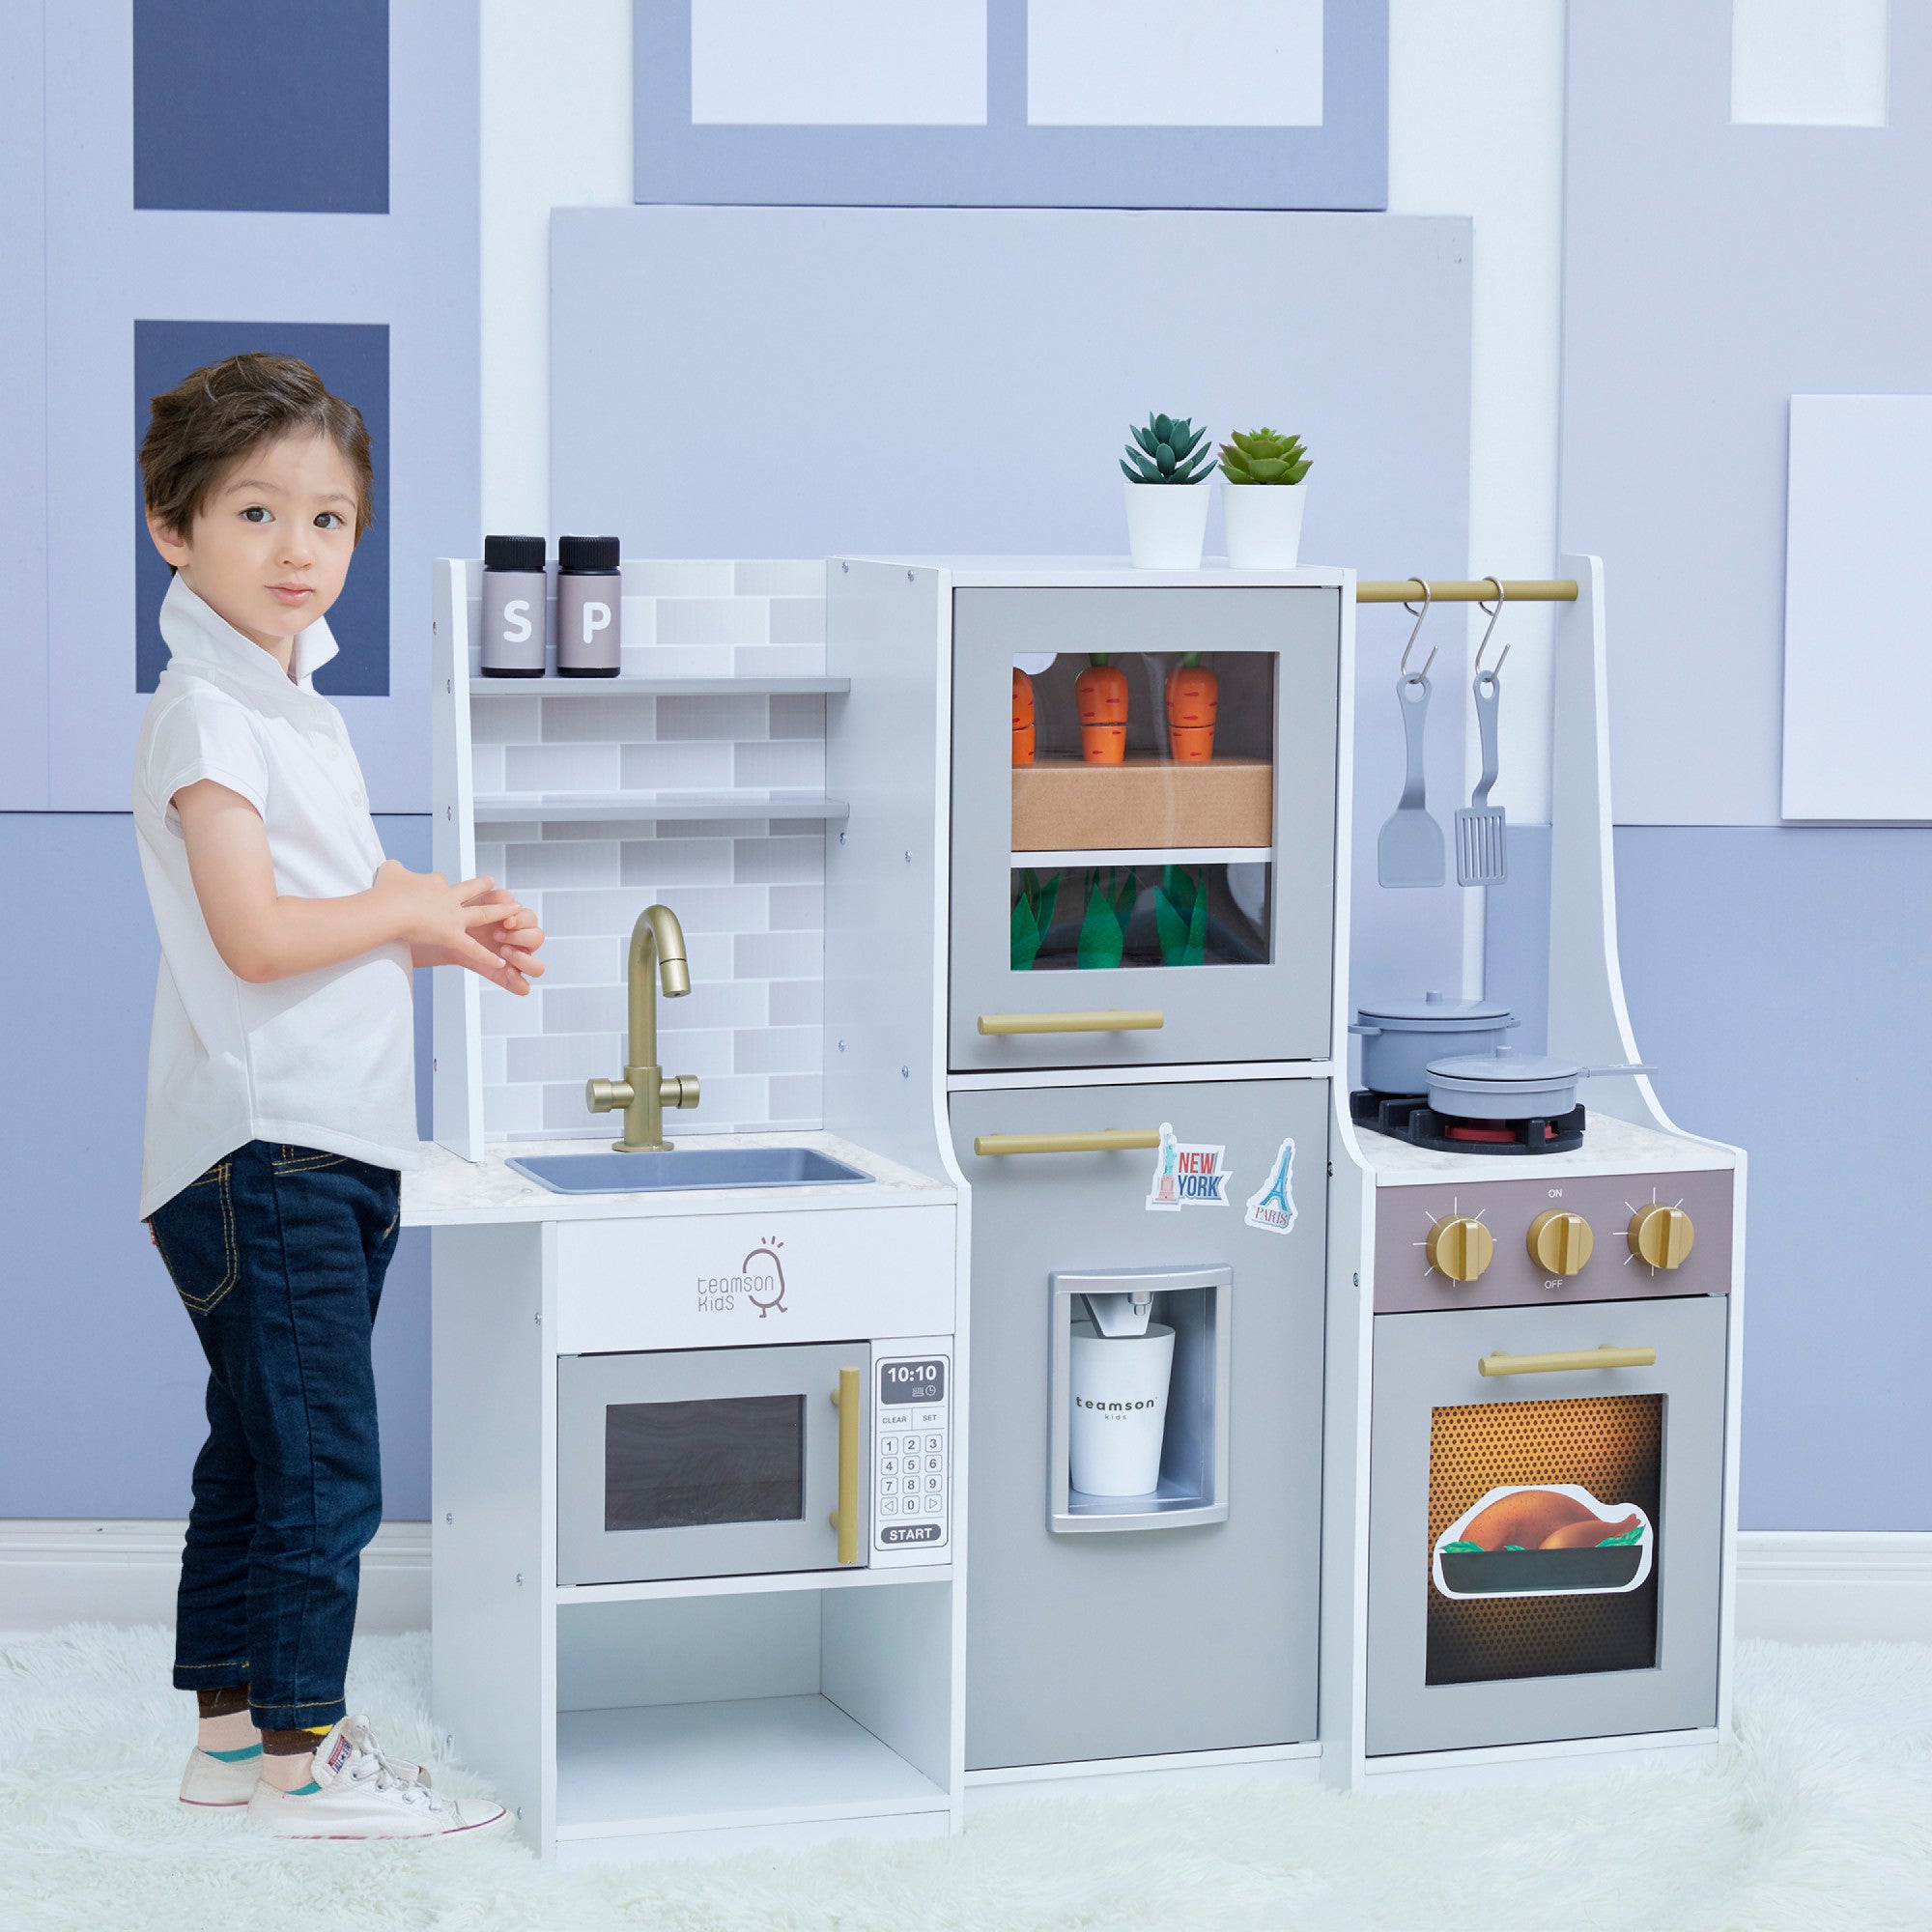 Teamson Kids Little Chef Lyon Complete Wooden Kitchen Set with Hydroponic Garden, Refrigerator and Accessories, Gray